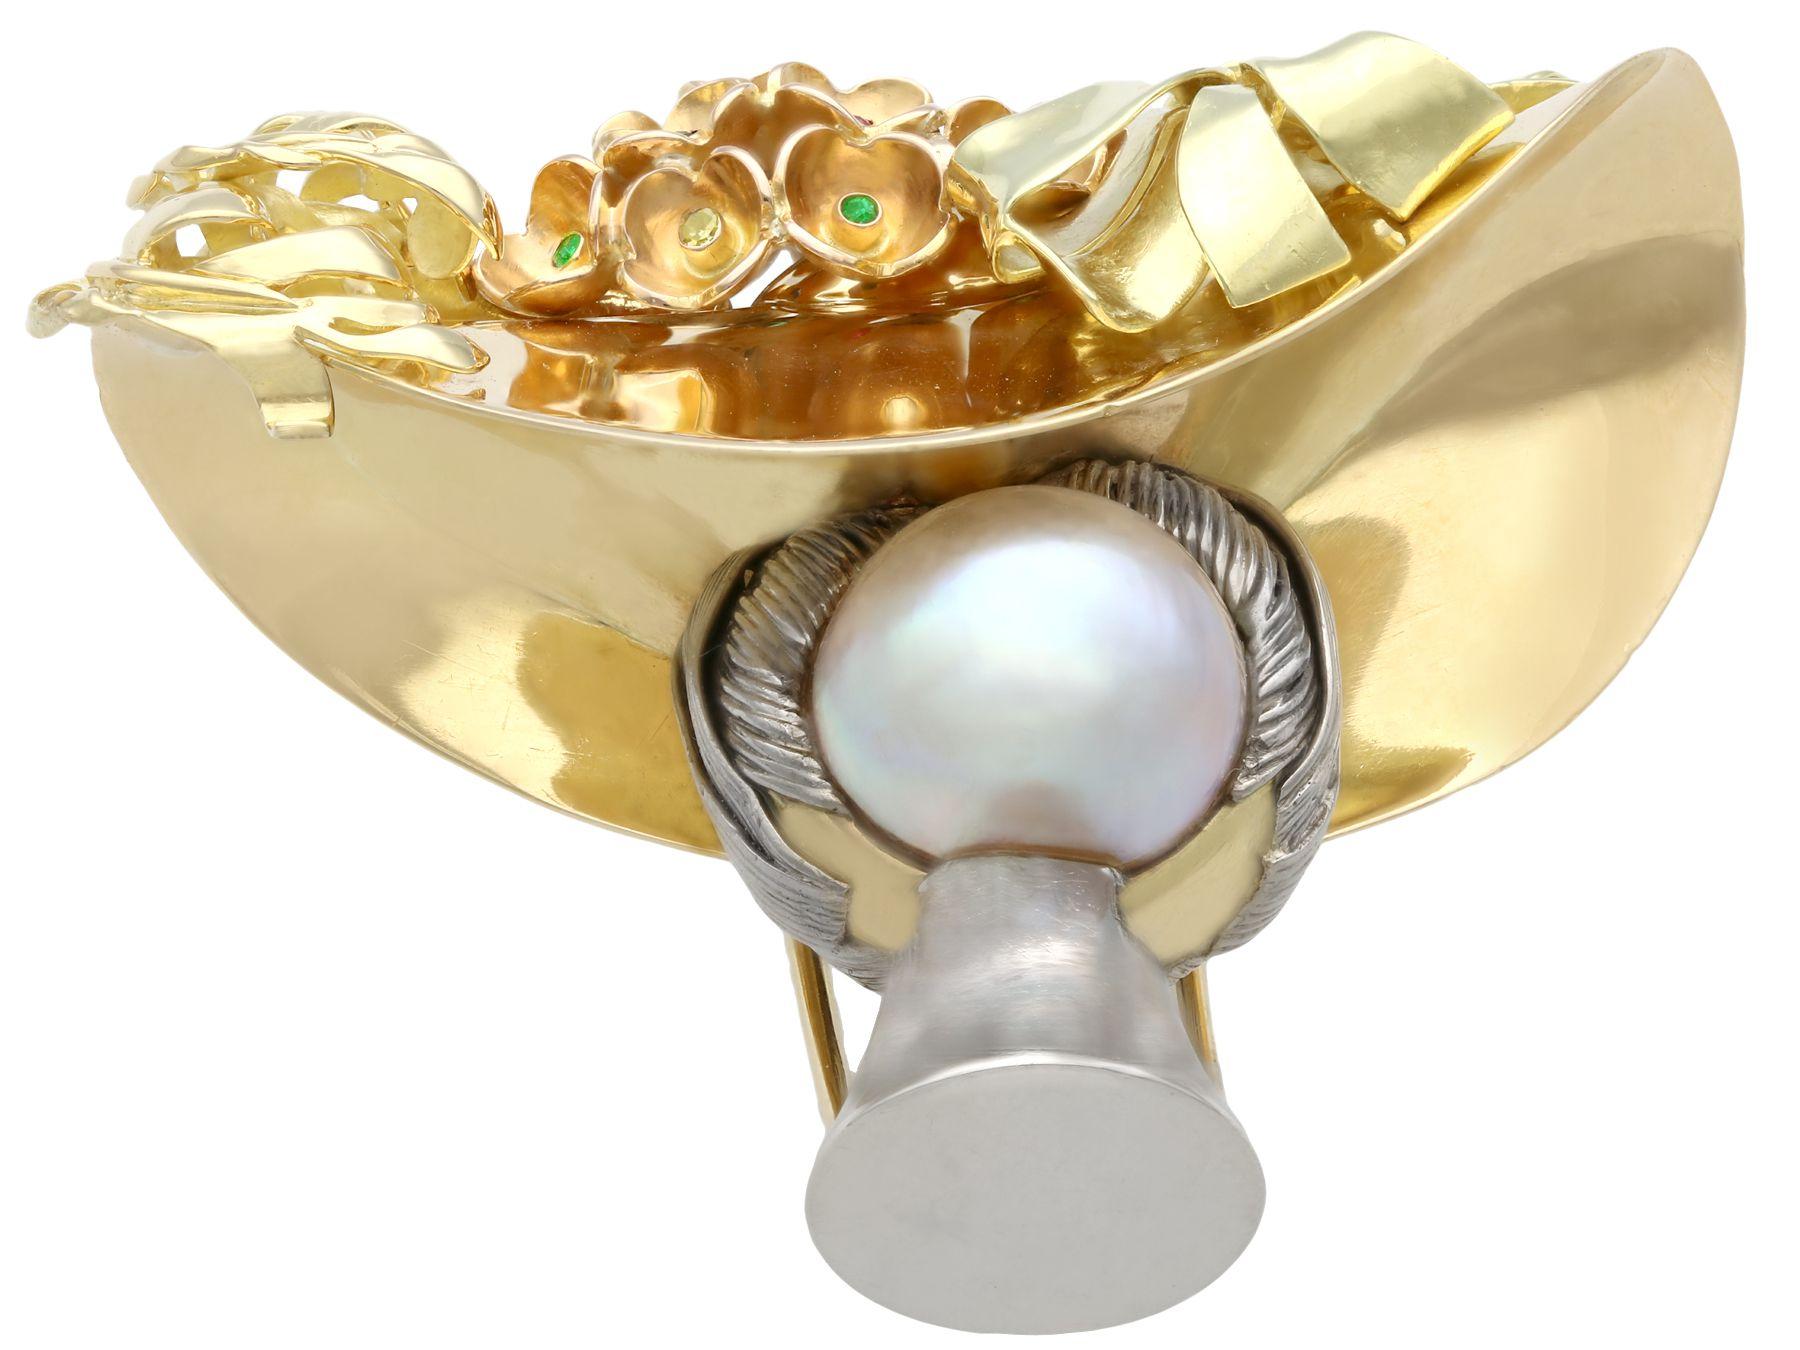 A stunning, fine and impressive mabe pearl, 0.12 carat fancy yellow diamond, 0.27 carat ruby, 0.13 carat sapphire and 0.12 carat emerald and 18 karat yellow gold brooch; part of our diverse antique jewelry collections.

This stunning, fine and